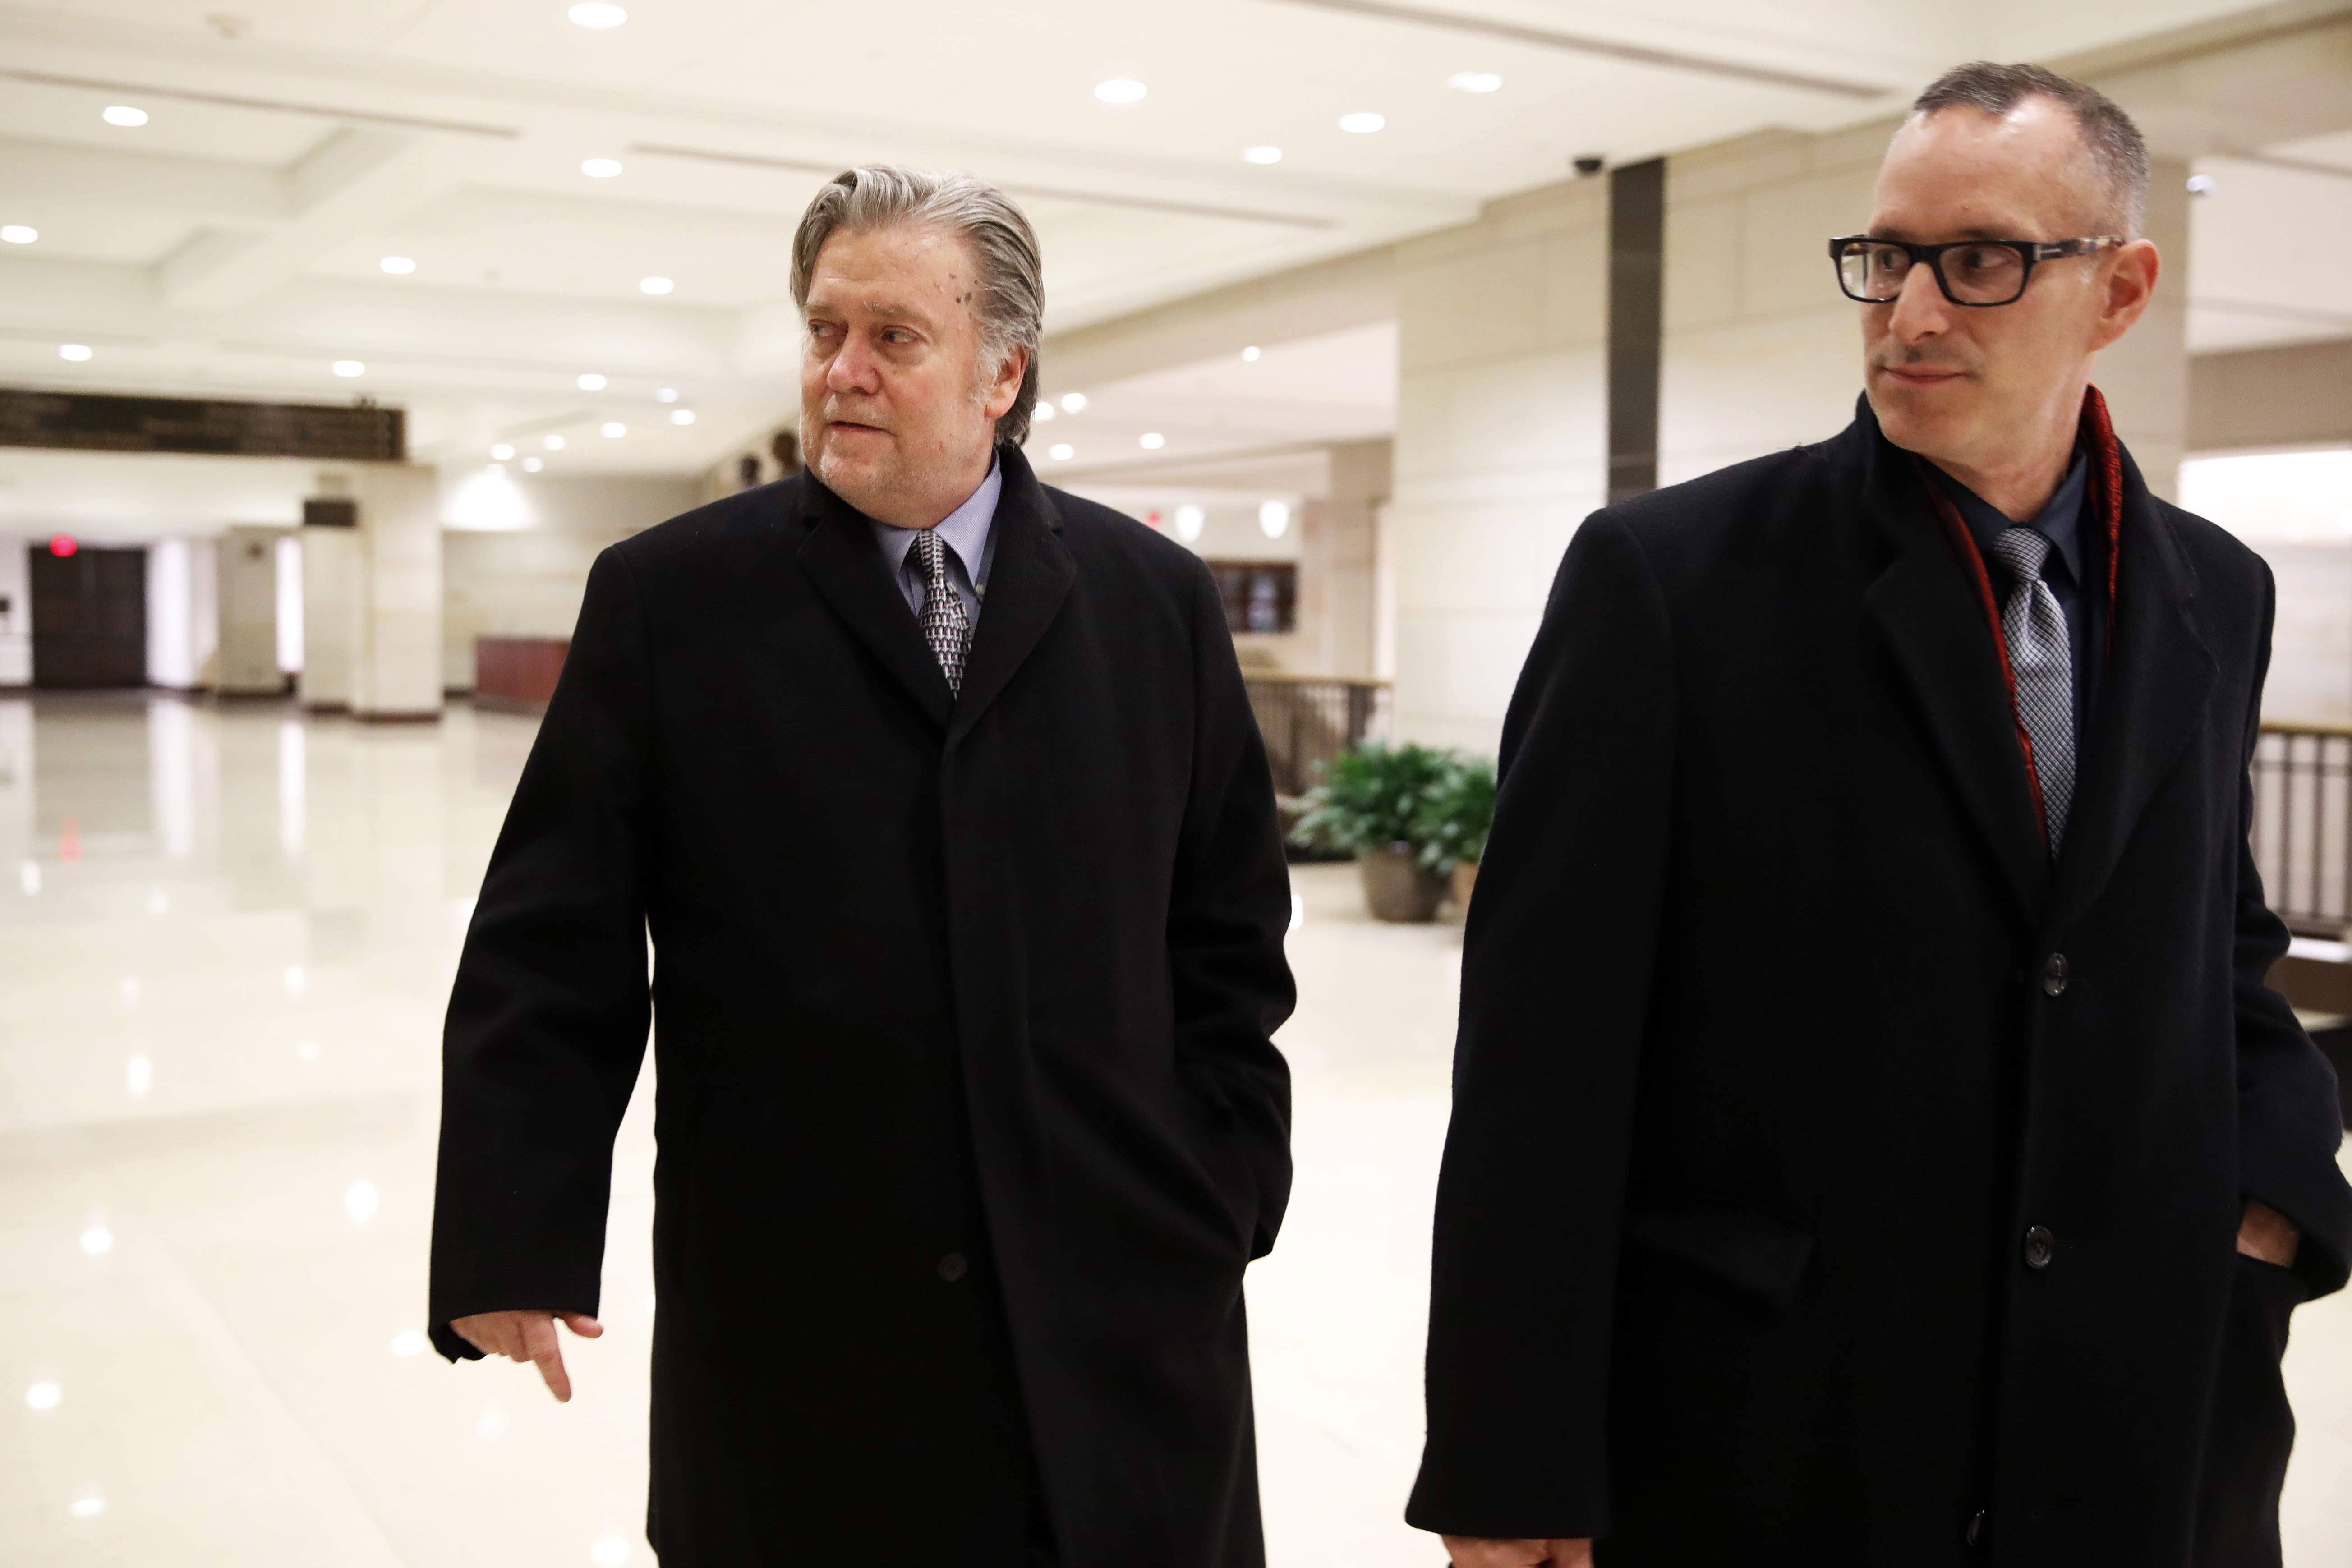 Former White House strategist Steve Bannon, left, leaves a House Intelligence Committee meeting where he was interviewed behind closed doors on Capitol Hill, Tuesday, Jan. 16, 2018, in Washington.